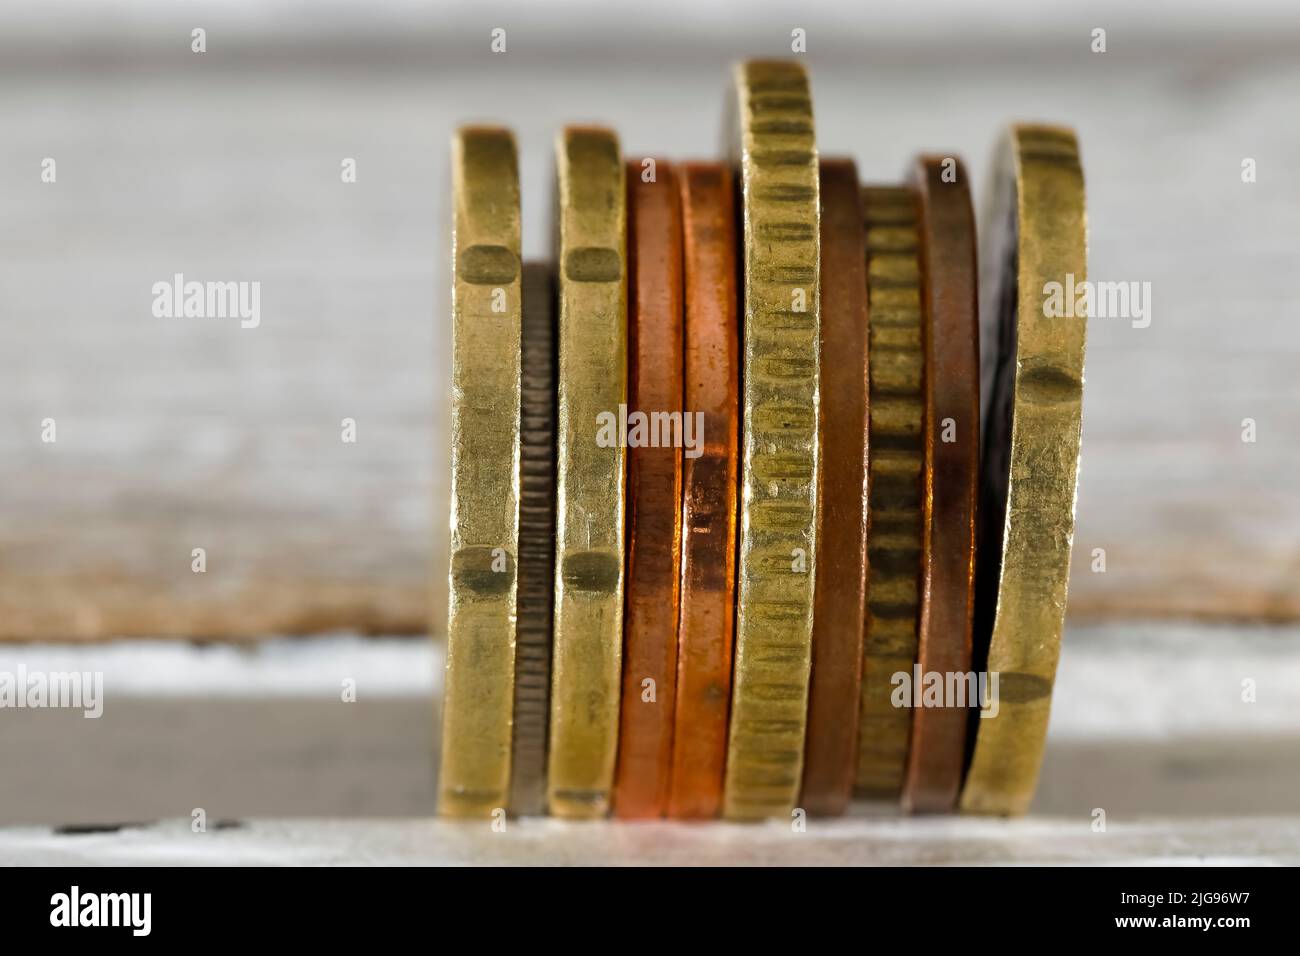 Euro coins have been arranged side by side here. Stock Photo